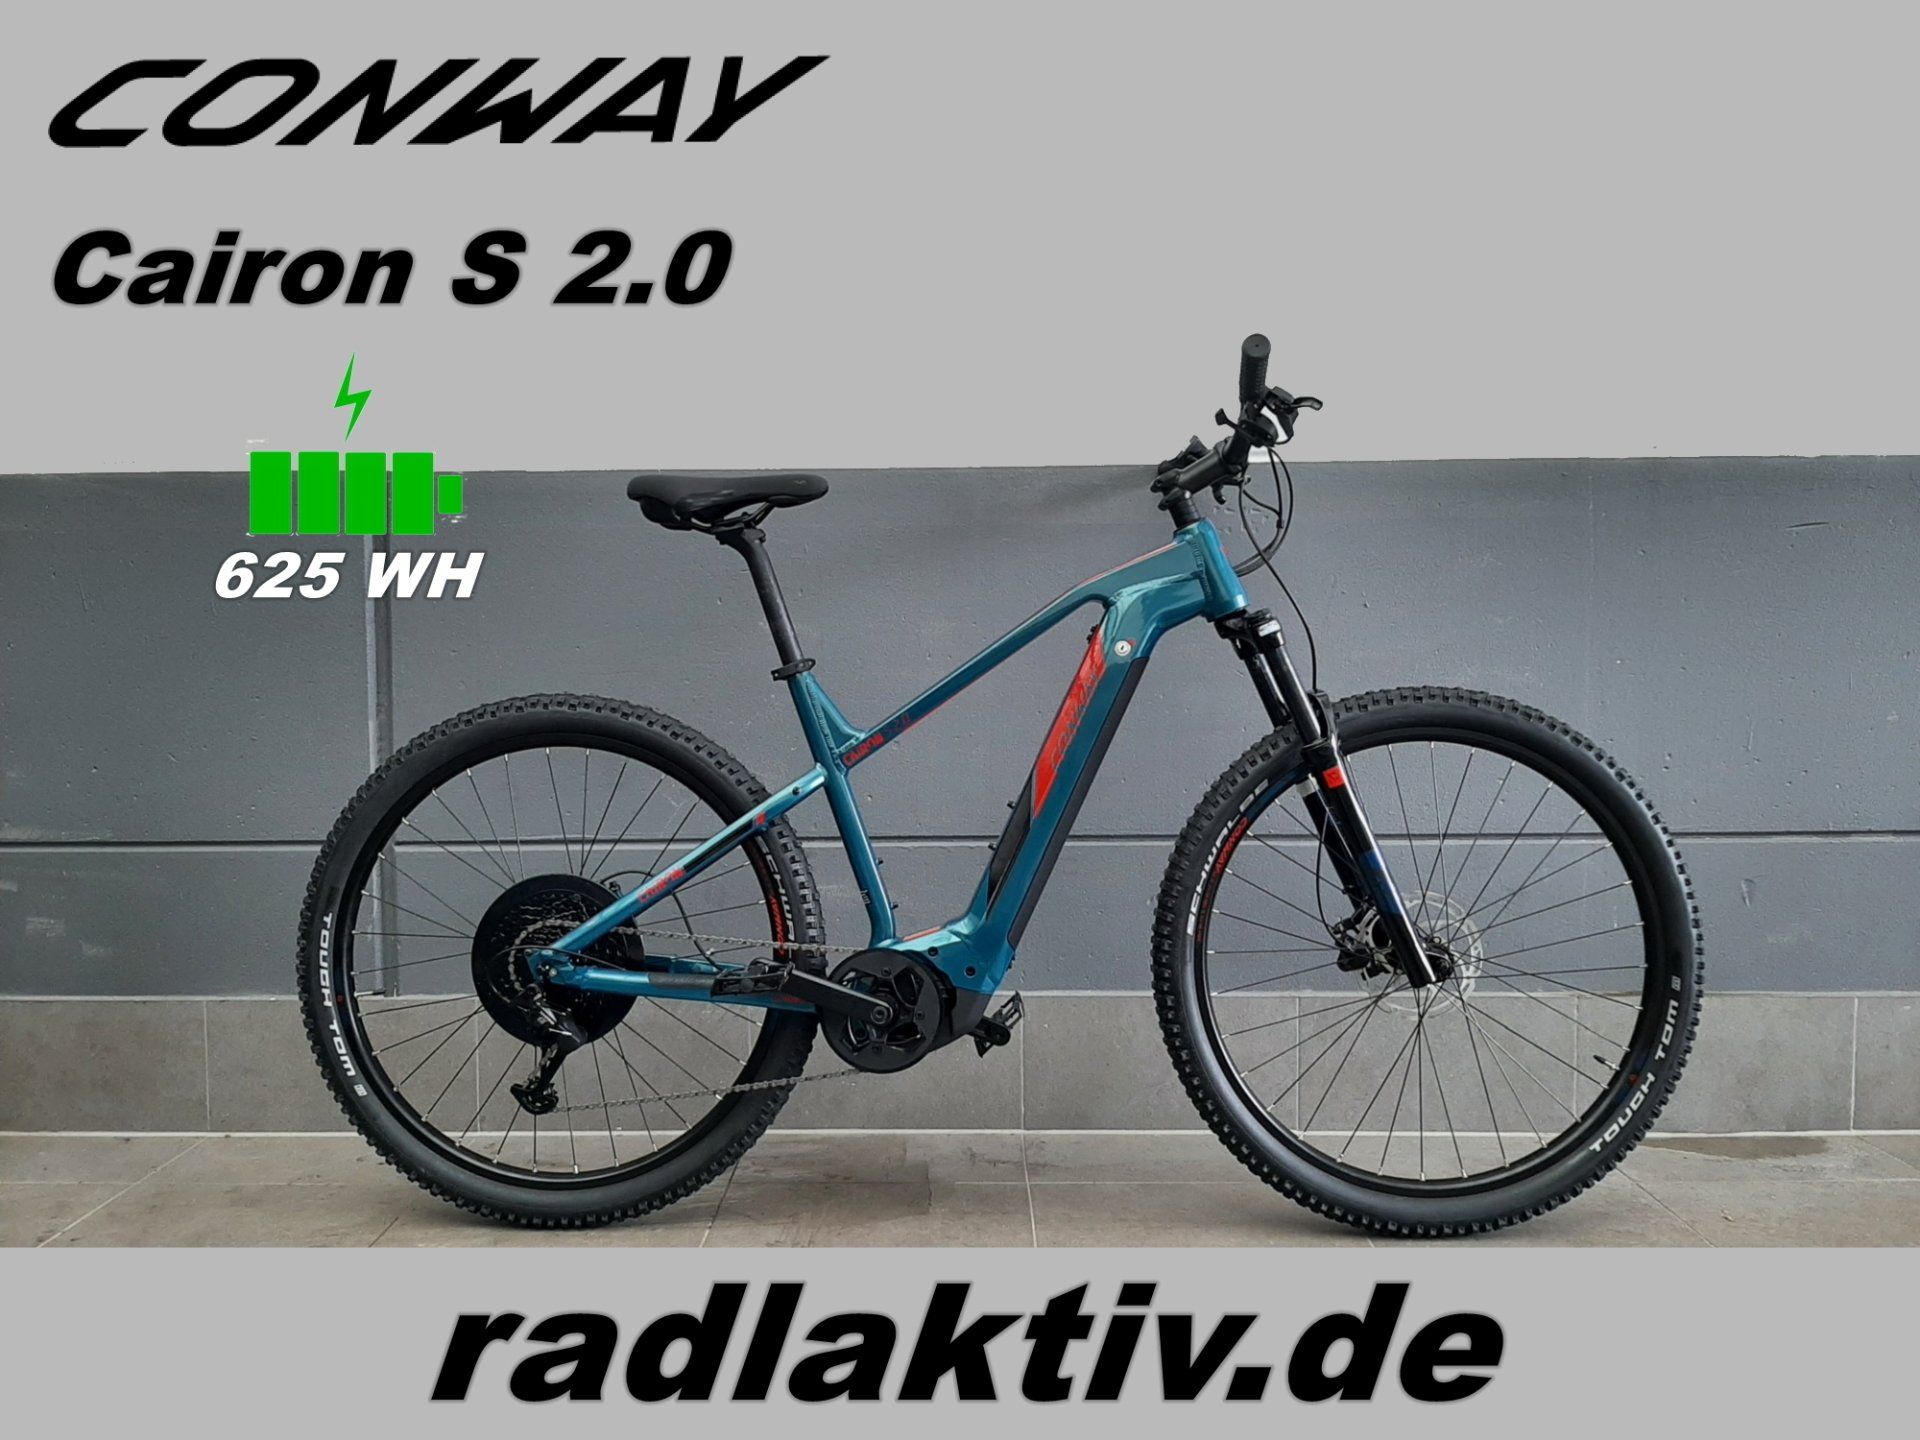 CONWAY Cairon S 2.0